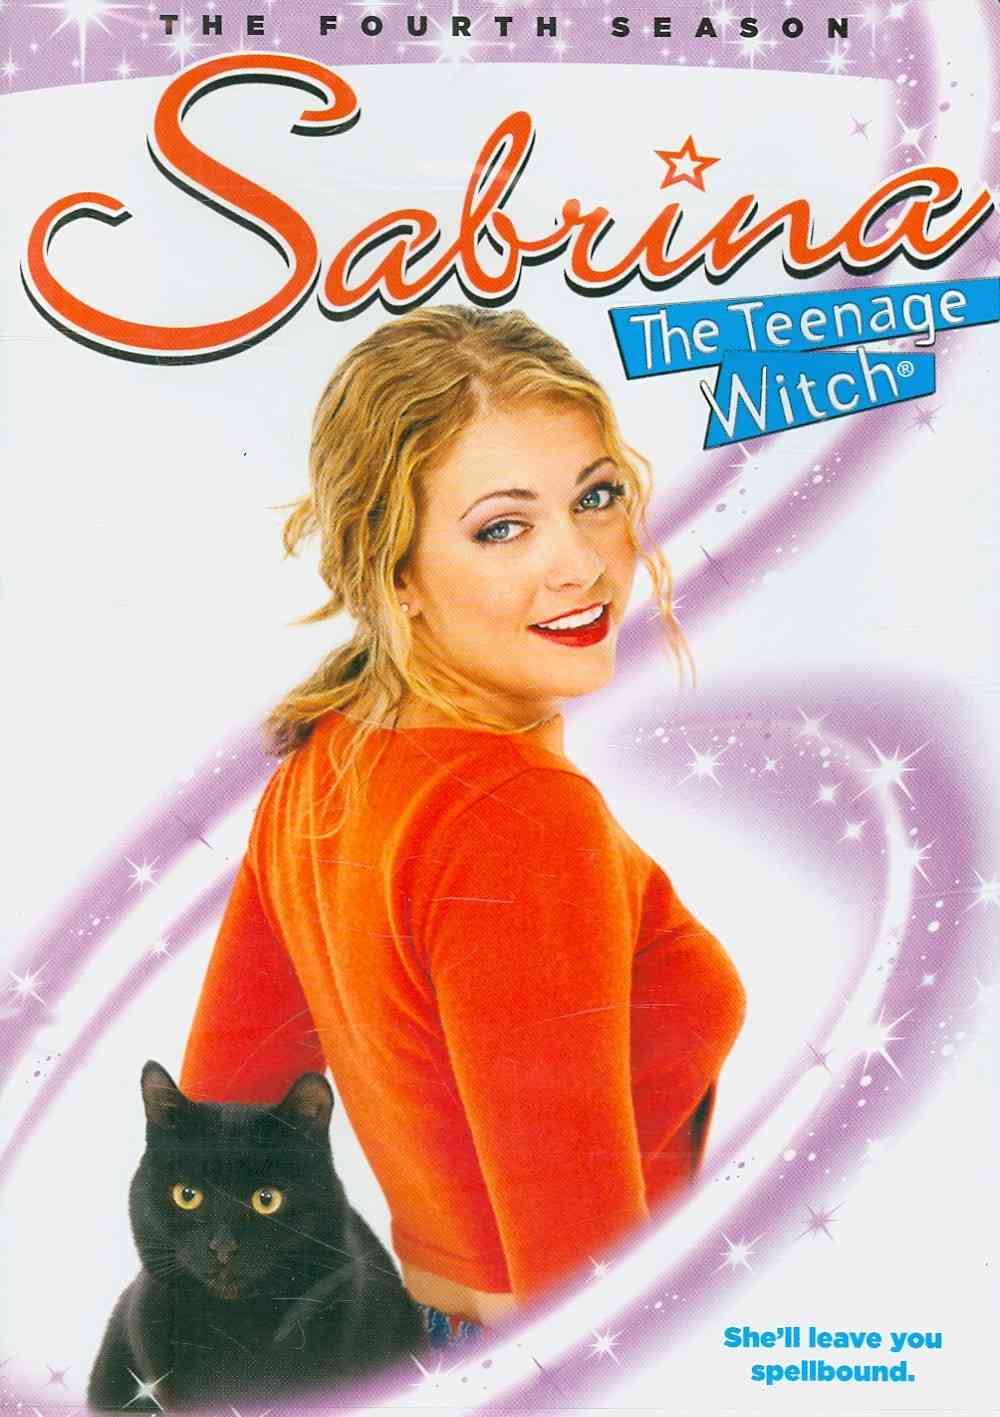 Sabrina The Teenage Witch - The Complete Fourth Season cover art